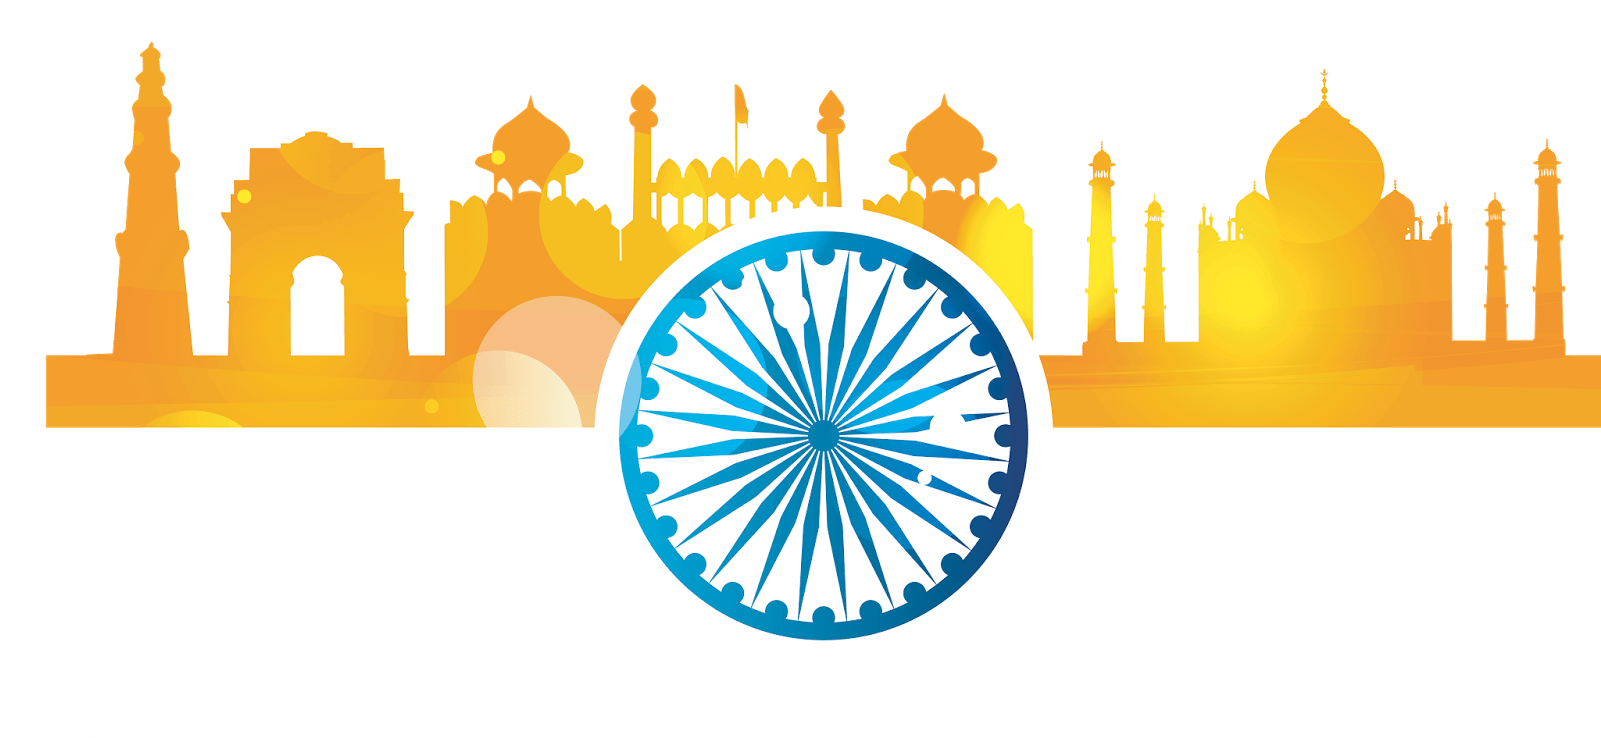 Indian Independence Day Celebration Graphic PNG